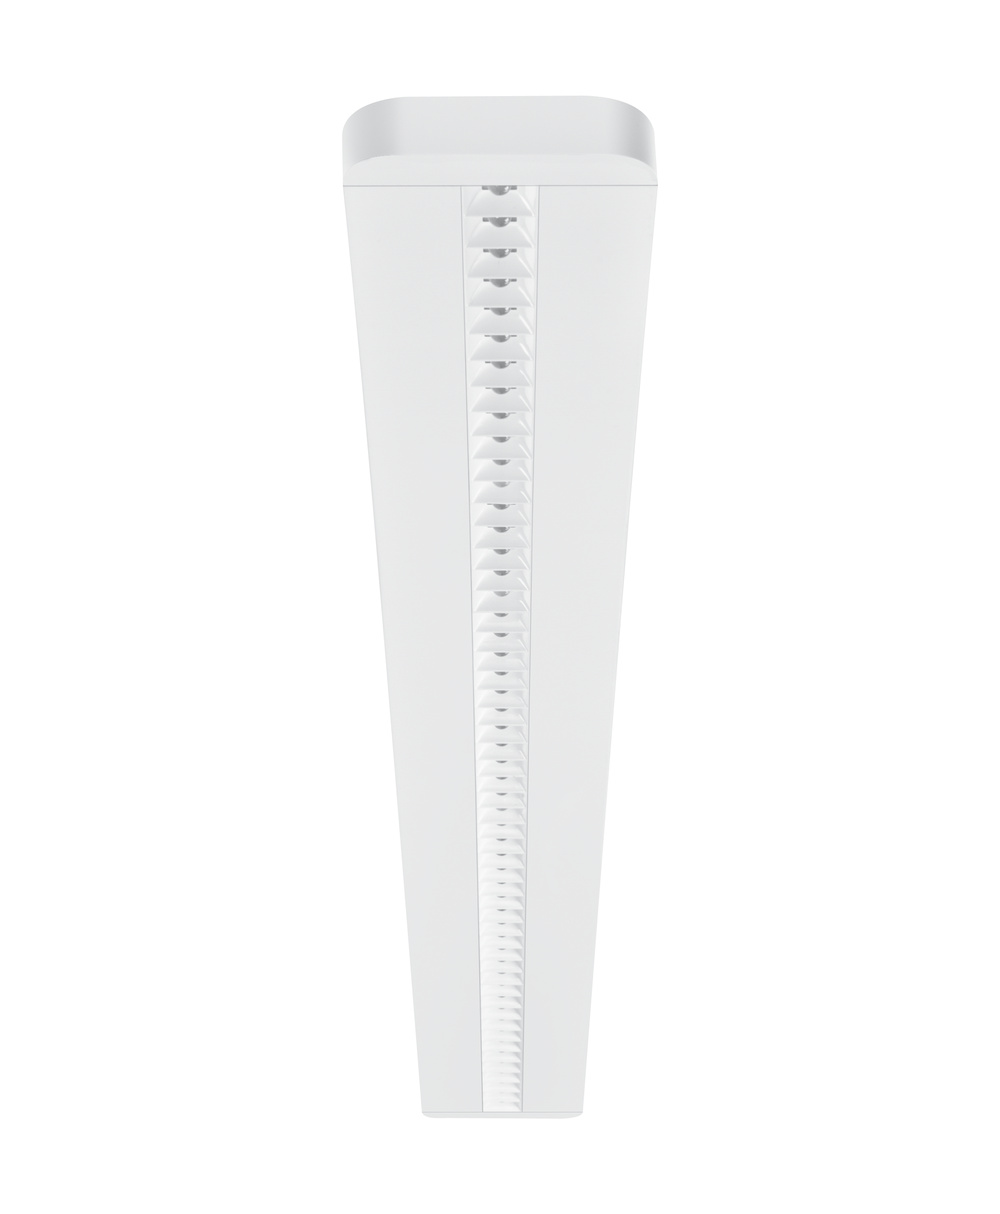 Ledvance LED linear luminaire LINEAR IndiviLED DIRECT 1500 48 W 940 - 4058075522473